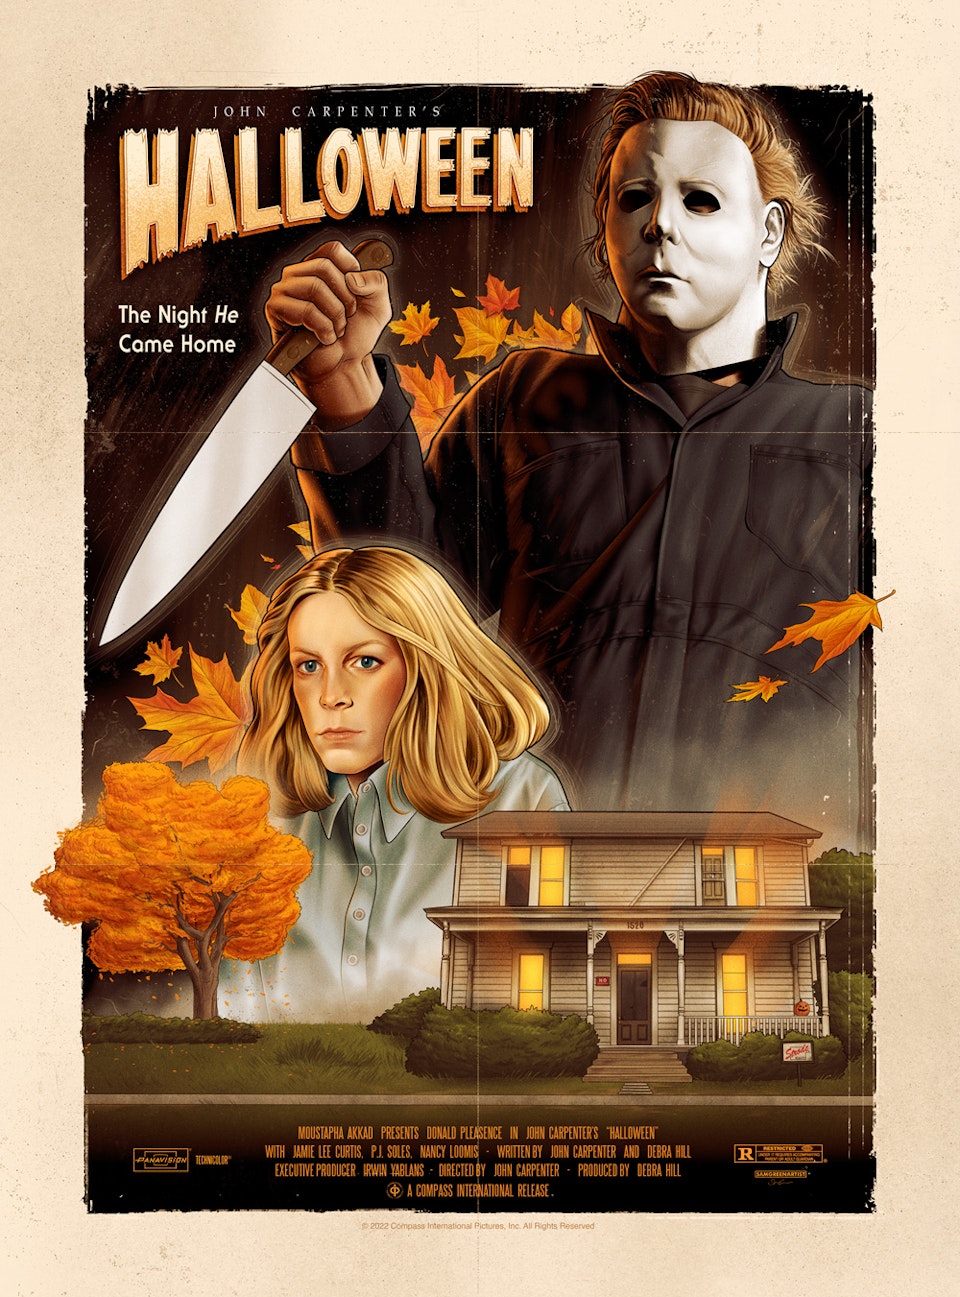 Halloween - Officially licensed 'Halloween' poster design, created for the 'Halloween' art book published by Printed In Blood.

Also available as an officially licensed print via PosterPosse. 18x 24 inches.

Halloween is an absolutely iconic and influential movie in the horror genre, and I was delighted at the opportunity to create some official work for it. There has been a lot of great Halloween art over the years, so I wanted to put my own spin on it. The angle I took was that of a retro B-movie horror poster, which was a lot of fun to execute.

The artwork was finalised and approved in late 2020, but due to delays brought on in part by the COVID pandemic release of the book wasn't until 2022. It's really interesting looking back over the piece after so long and seeing where my style has developed since.

Illustrated in Procreate on iPad Pro, with final assembly in Adobe Photoshop.